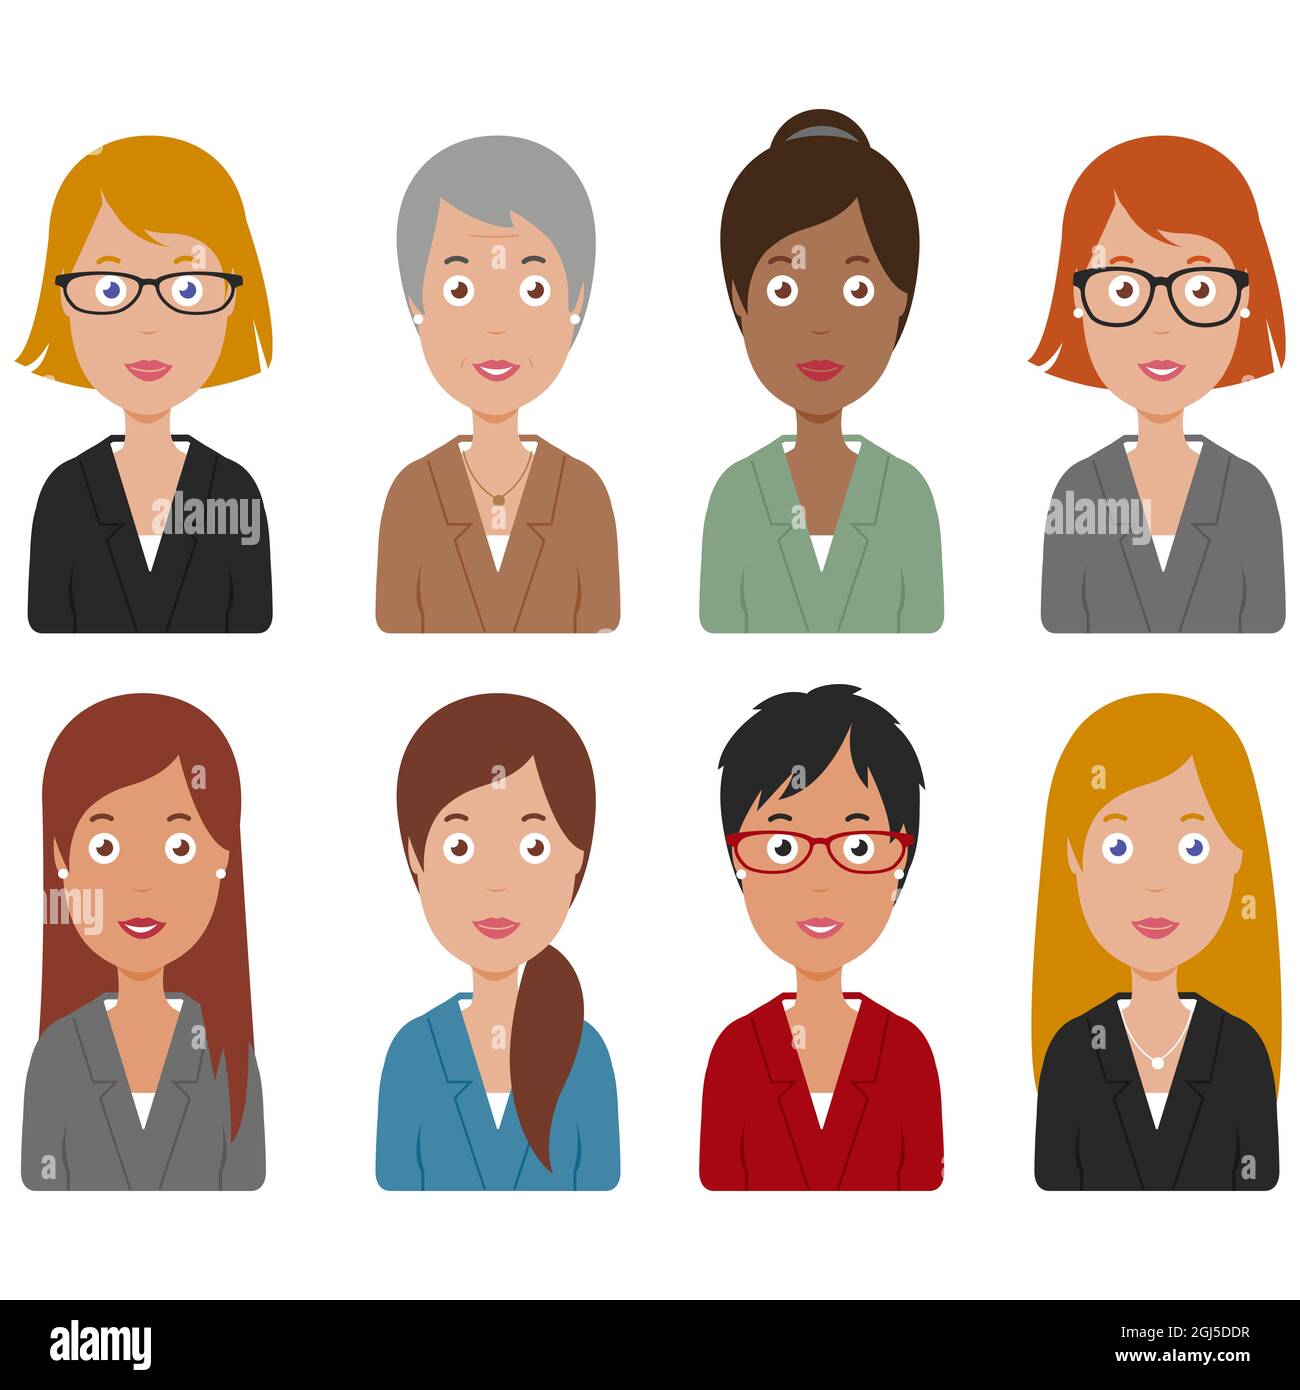 Group of business women. Stock Photo